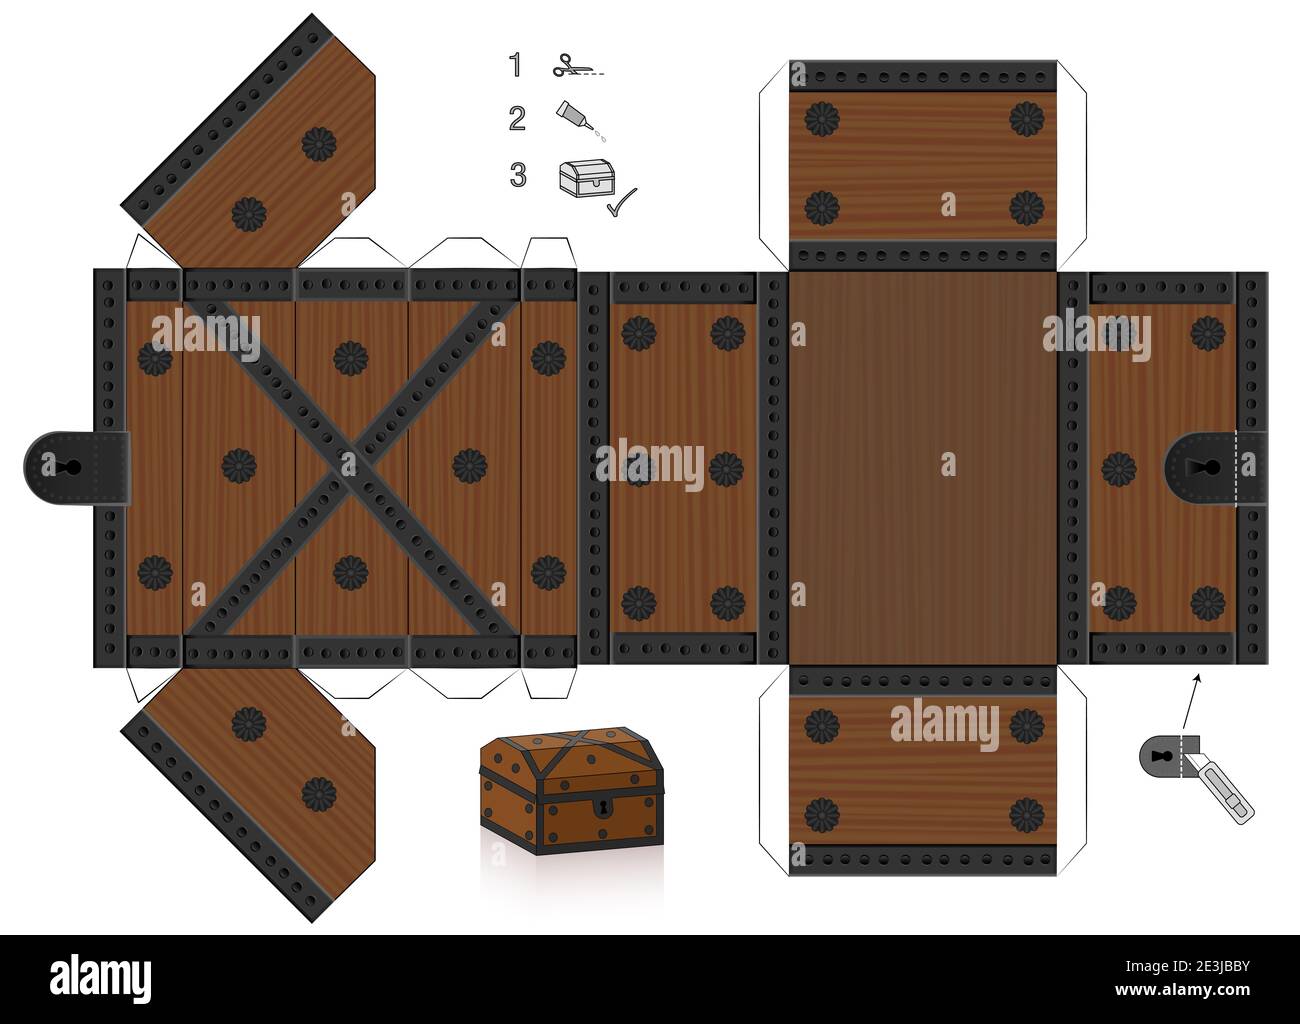 Treasure chest template. Cut out, fold and glue it. Paper model with lid that can be opened. Wooden textured box for precious objects, luxury. Stock Photo